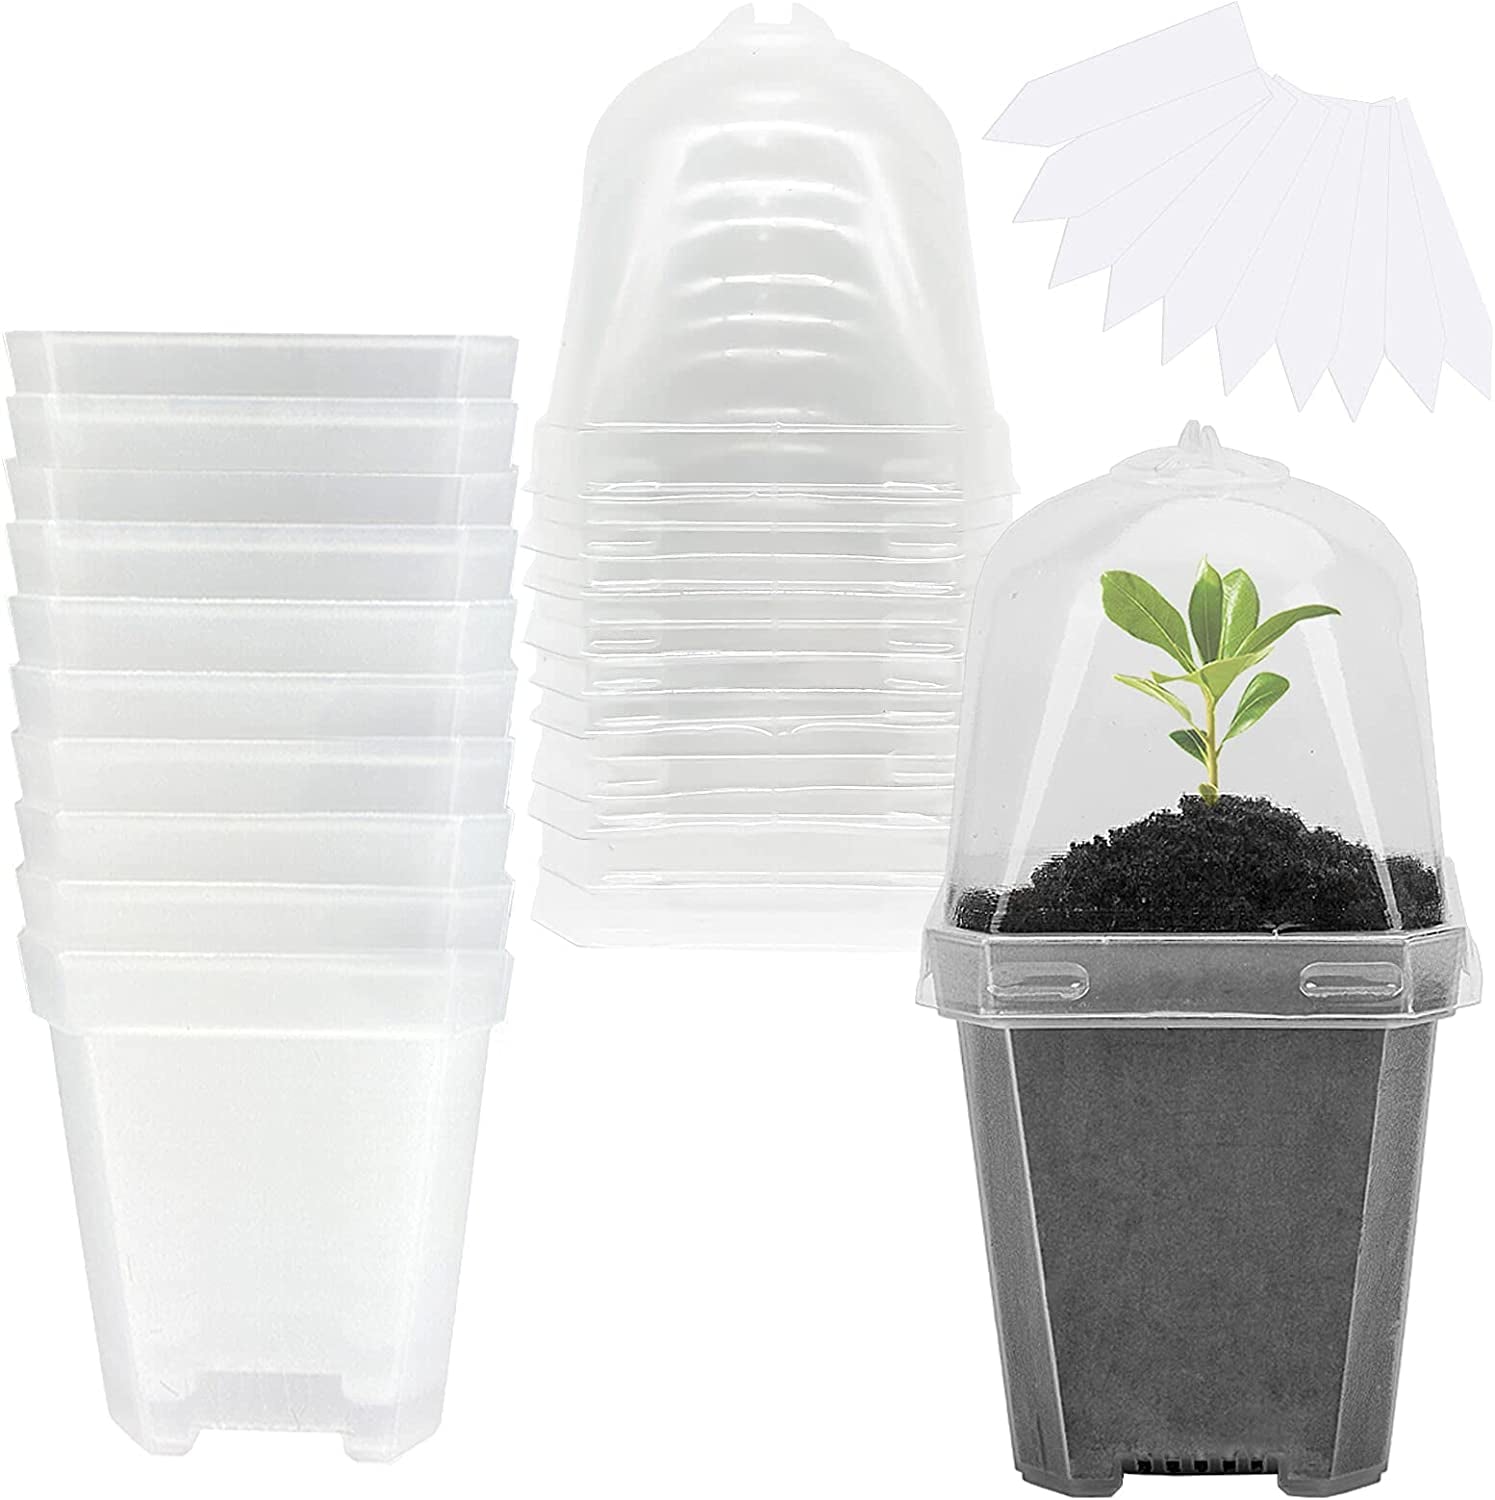 EBaokuup, Ebaokuup 10PCS Clear Plant Nursery Pots with Humidity Dome - 3" Plastic Gardening Pot with Labels, Durable Plastic Plant Container for Seedlings/Vegetables/Succulents/Cuttings